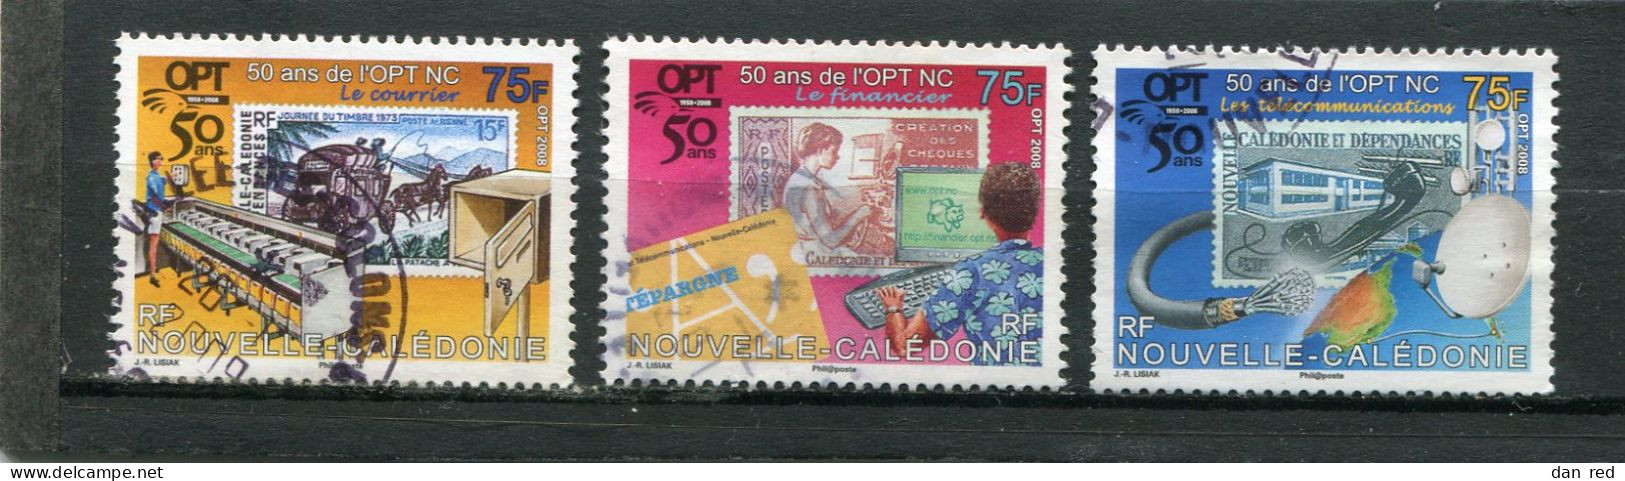 NOUVELLE CALEDONIE  N°  1045 A 1047  (Y&T)  (Oblitéré) - Used Stamps